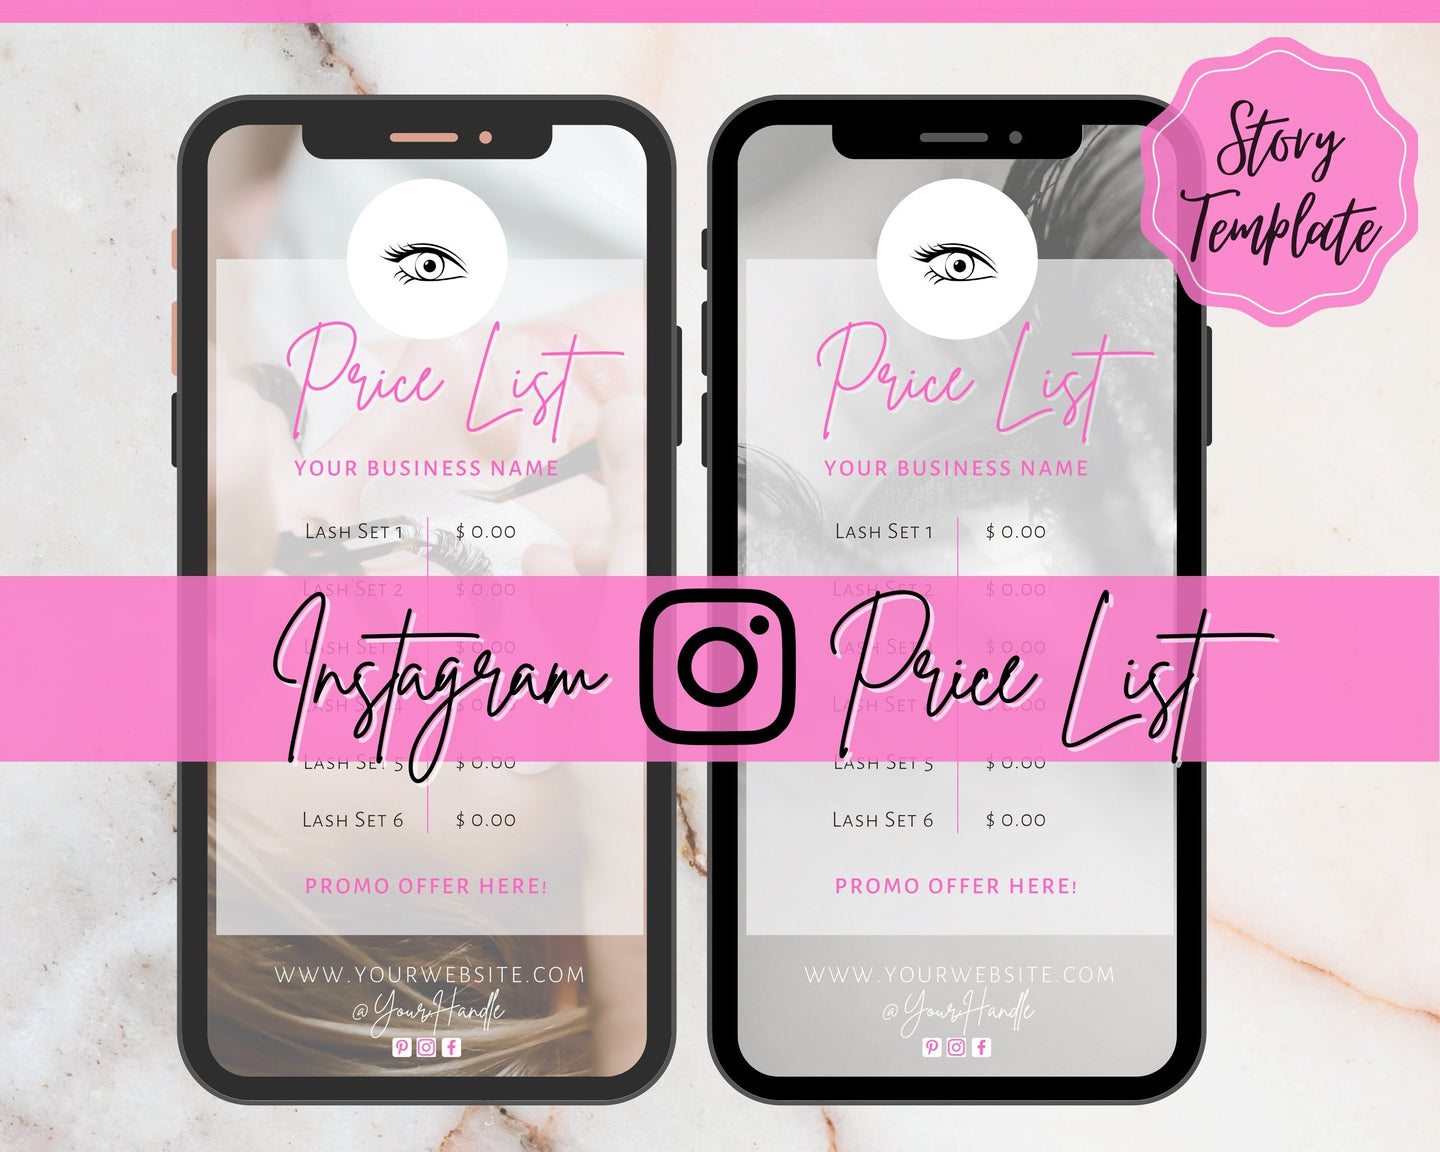 Instagram Template PRICE LIST Instagram Story! Canva Price List Template, Beauty, Lashes, IG Stories, Highlights, Marketing, Social Media | Beauty Lashes